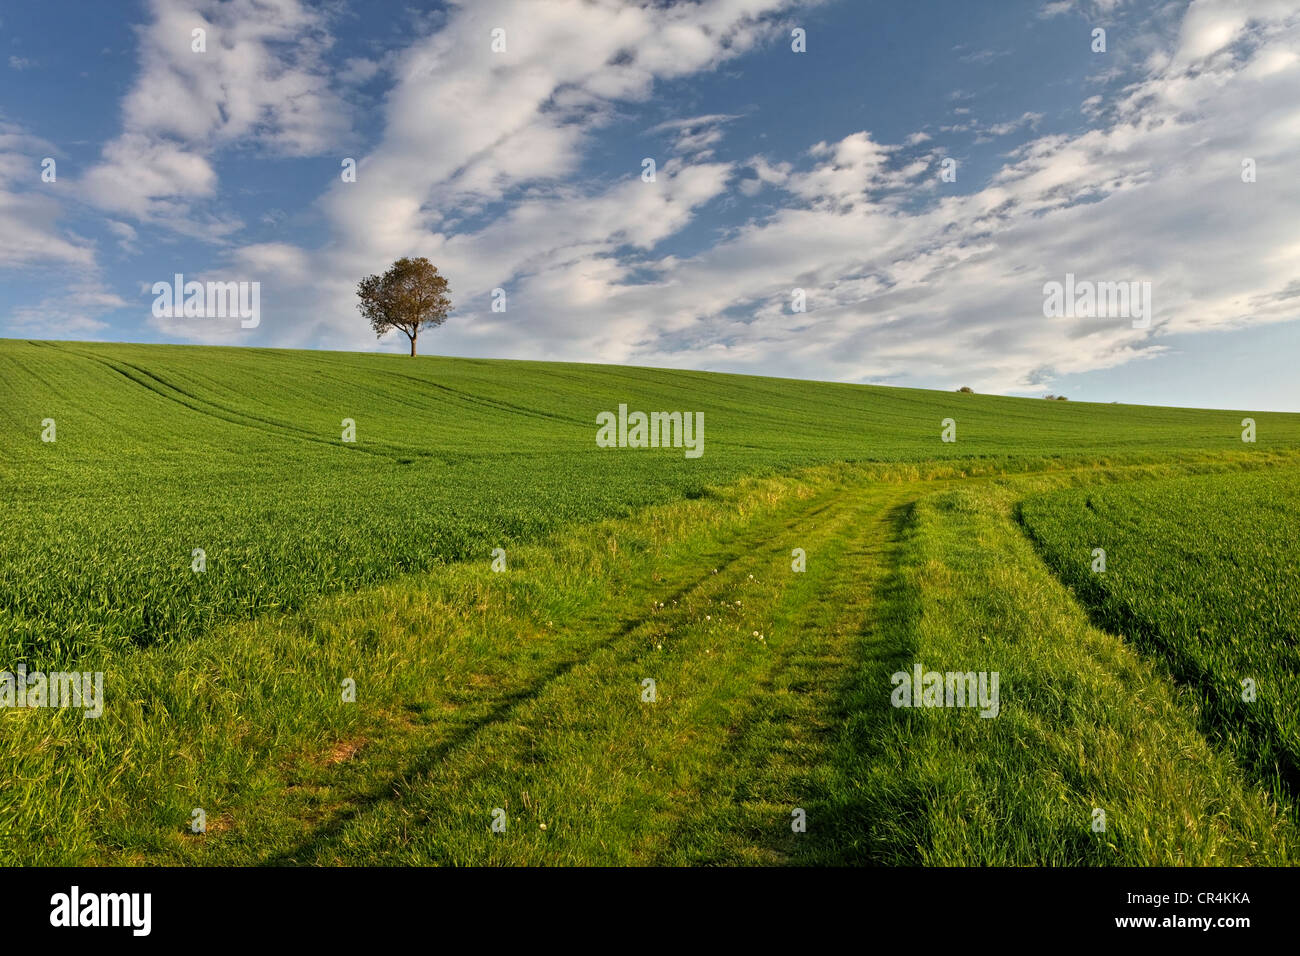 Isolate tree, green field, agricultural landscape, Puy de Dome, Auvergne, France, Europe Stock Photo